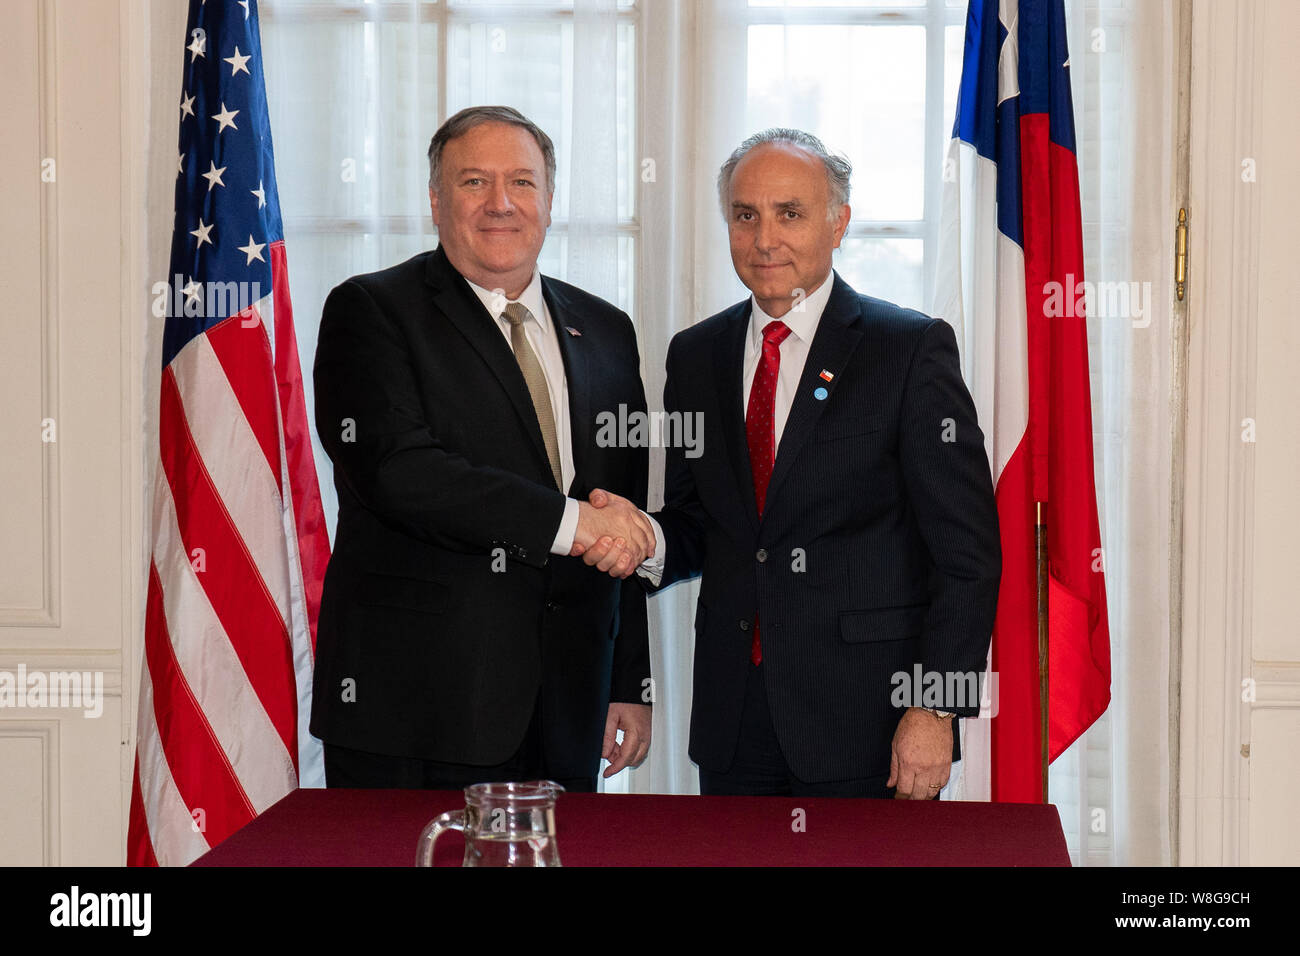 U.S. Secretary of State Michael R. Pompeo meets with Chilean Foreign Minister Teodoro Ribera in Buenos Aires, Argentina on July 19, 2019. Stock Photo